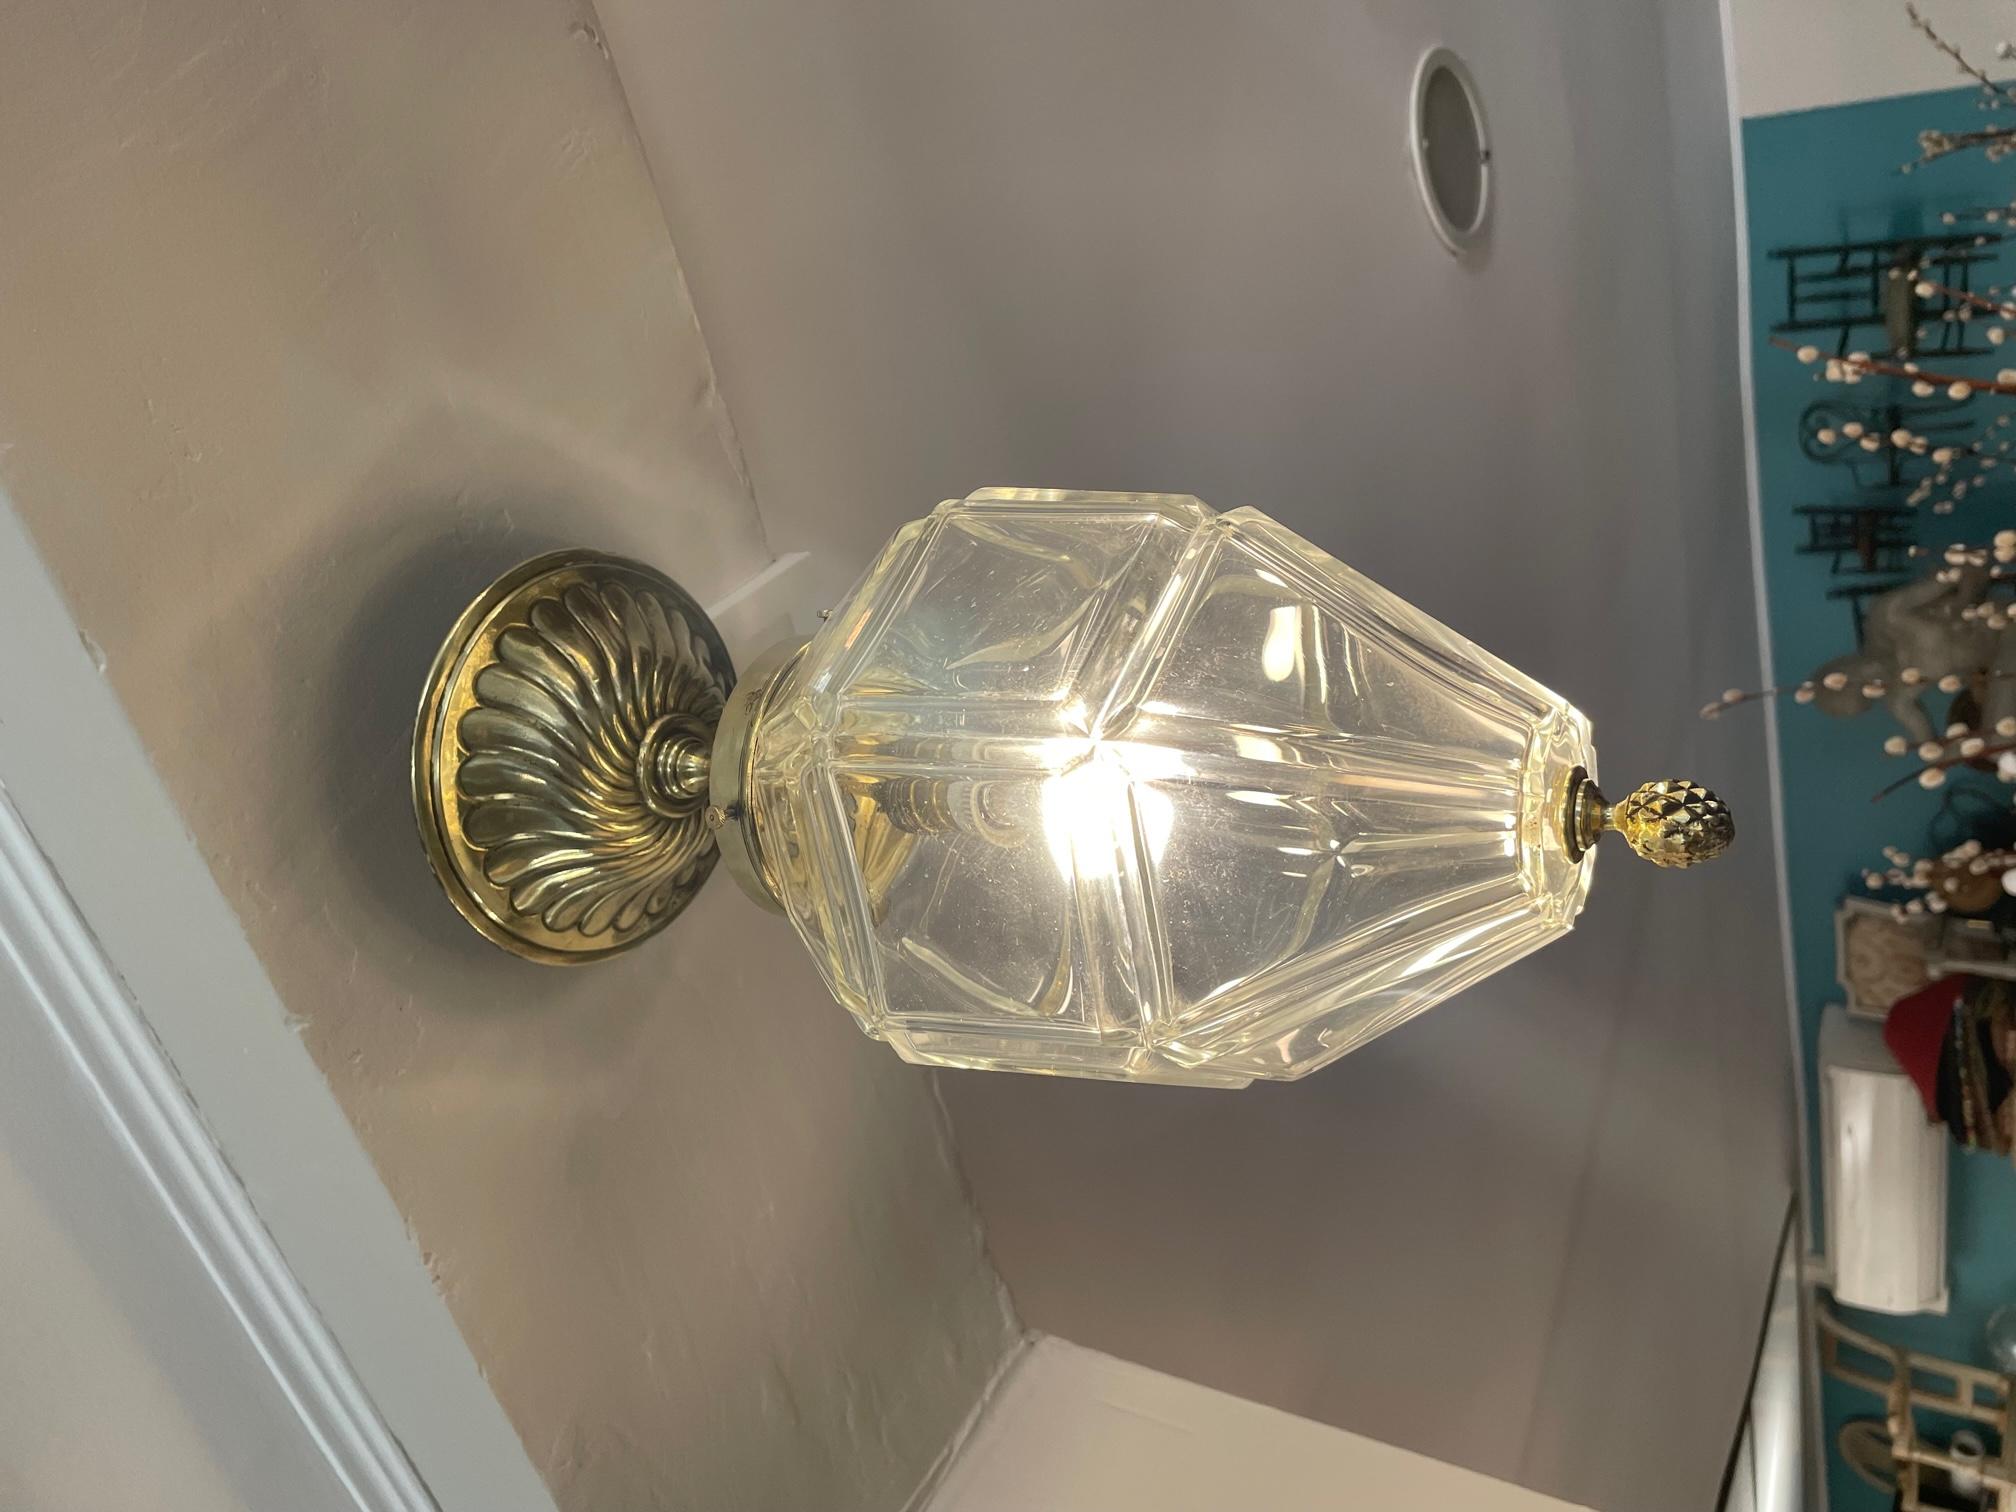 Very nice early 20th century French gilded brass and beveled glass light pendant. 
A glans is decorating the bottom of the pendant. 
Very nice quality and condition.